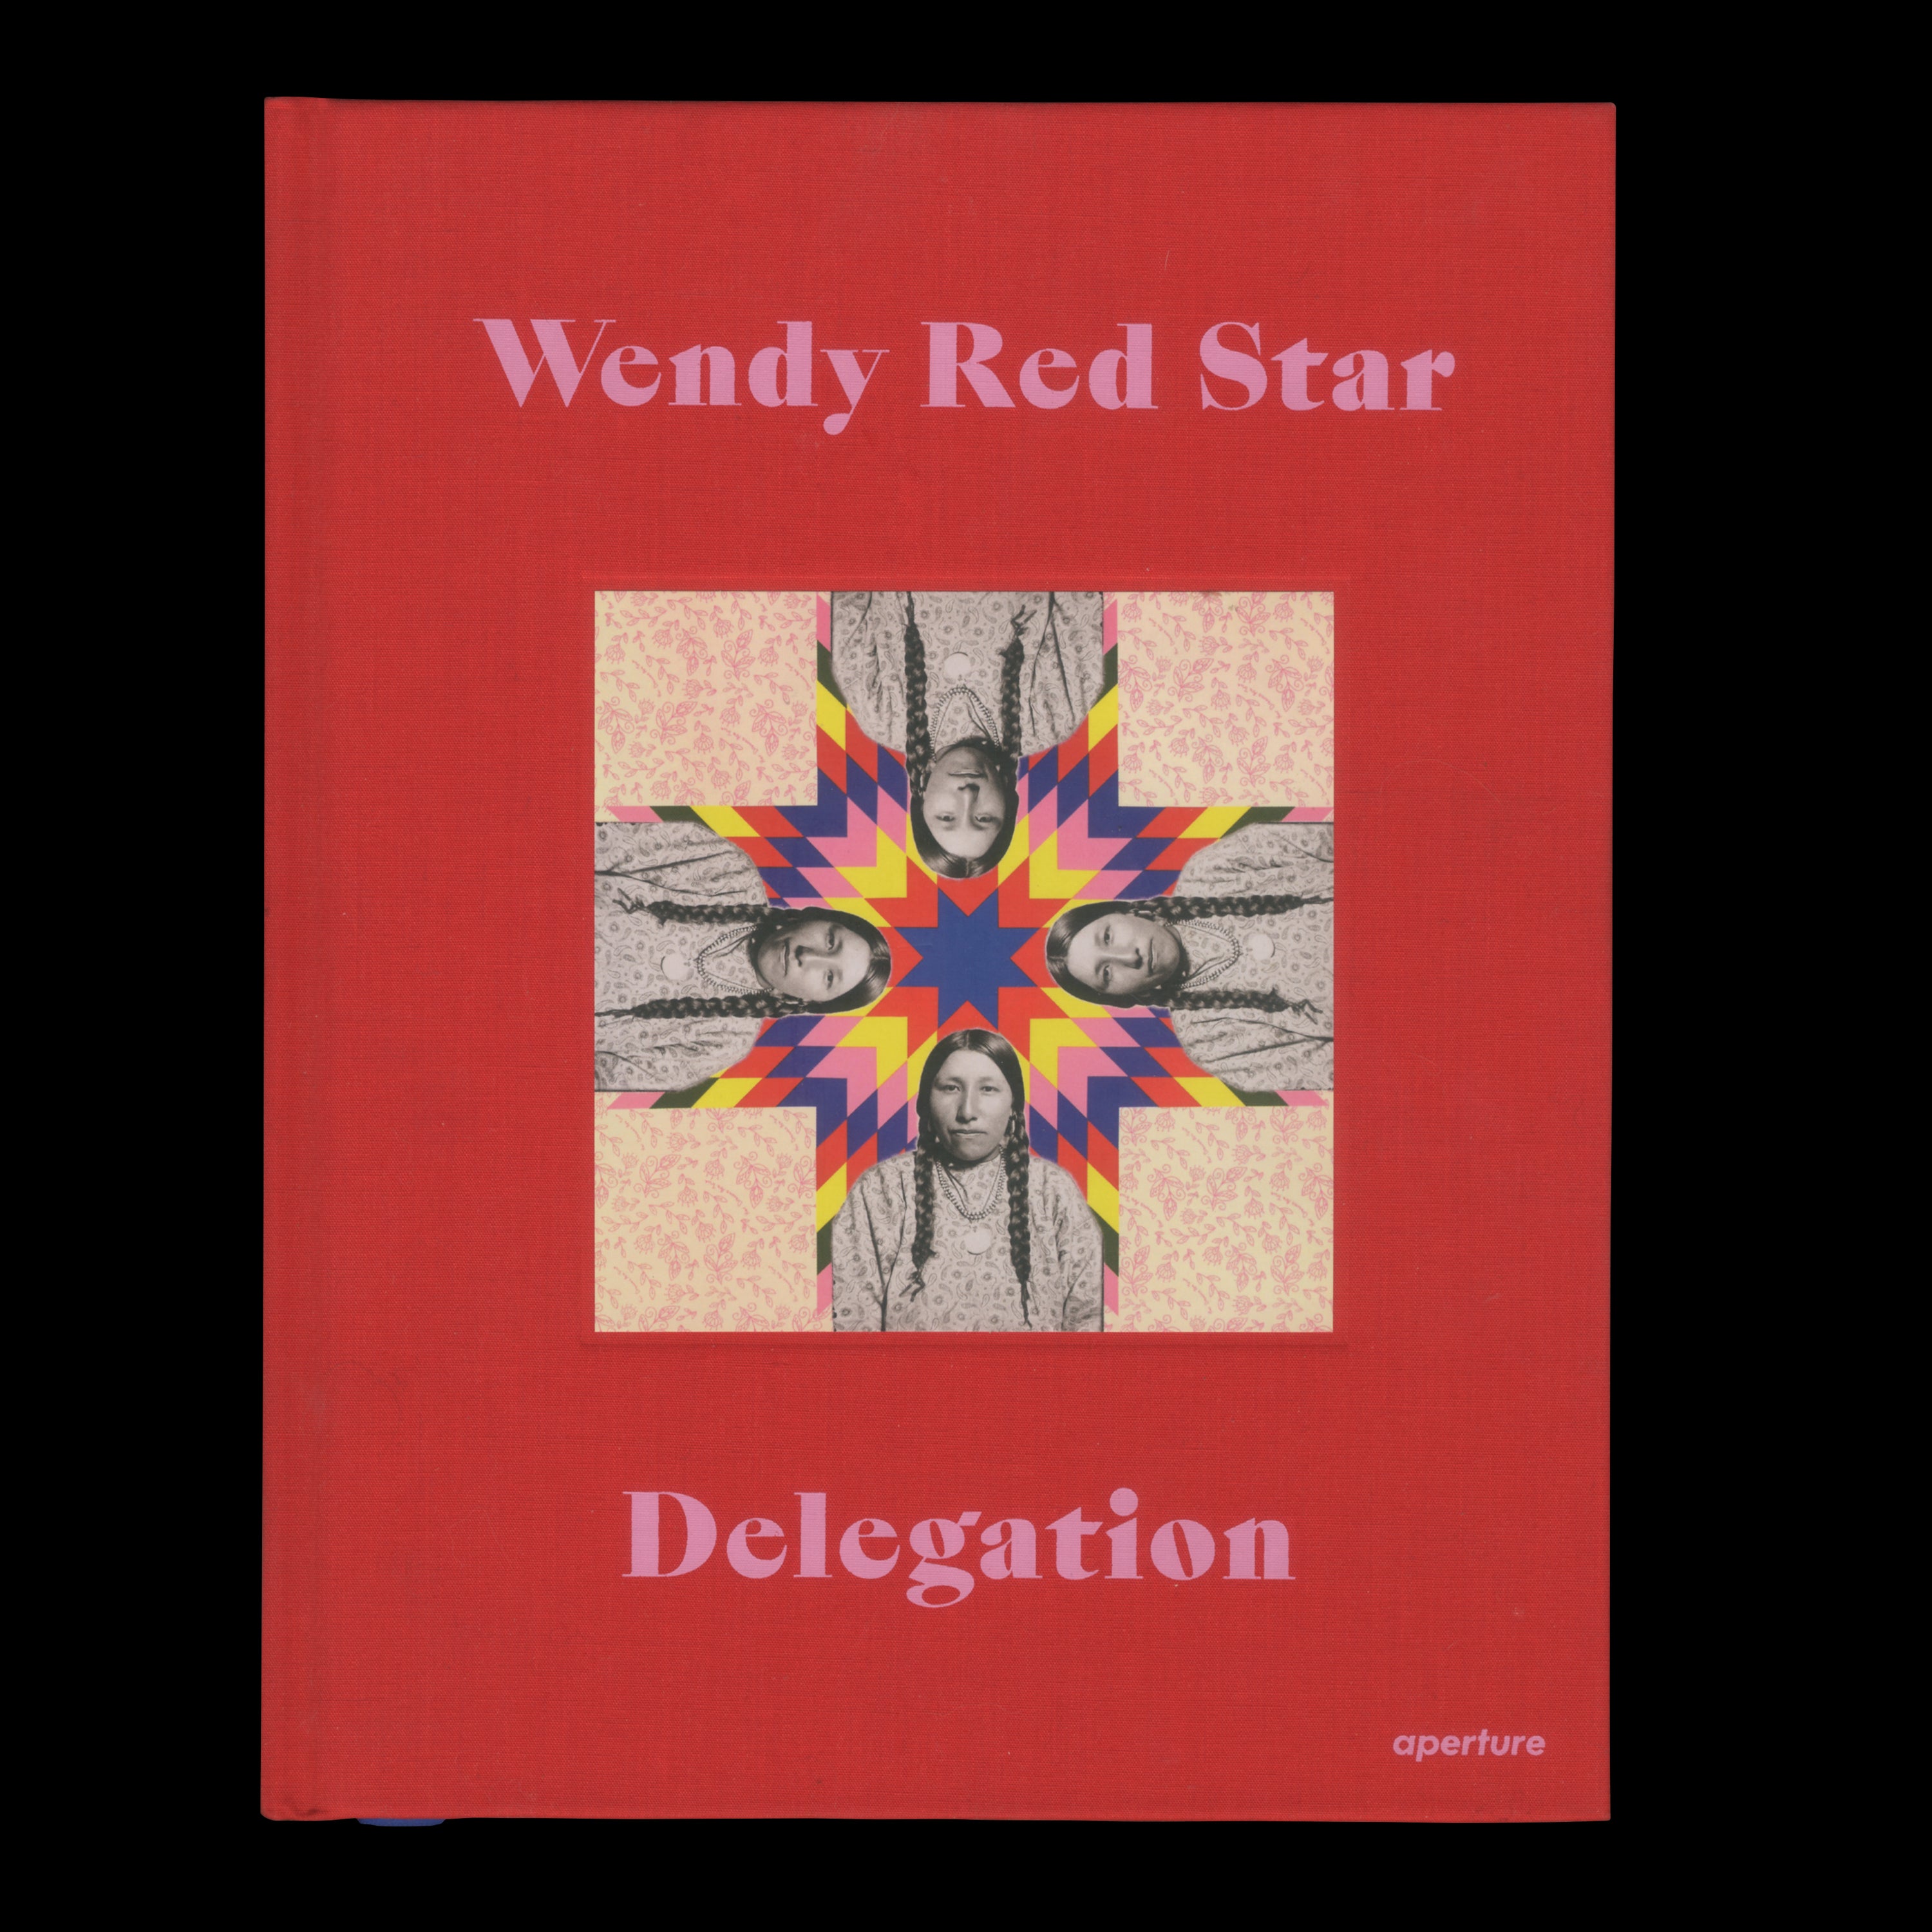 DELEGATION by Wendy Red Star, Aperture